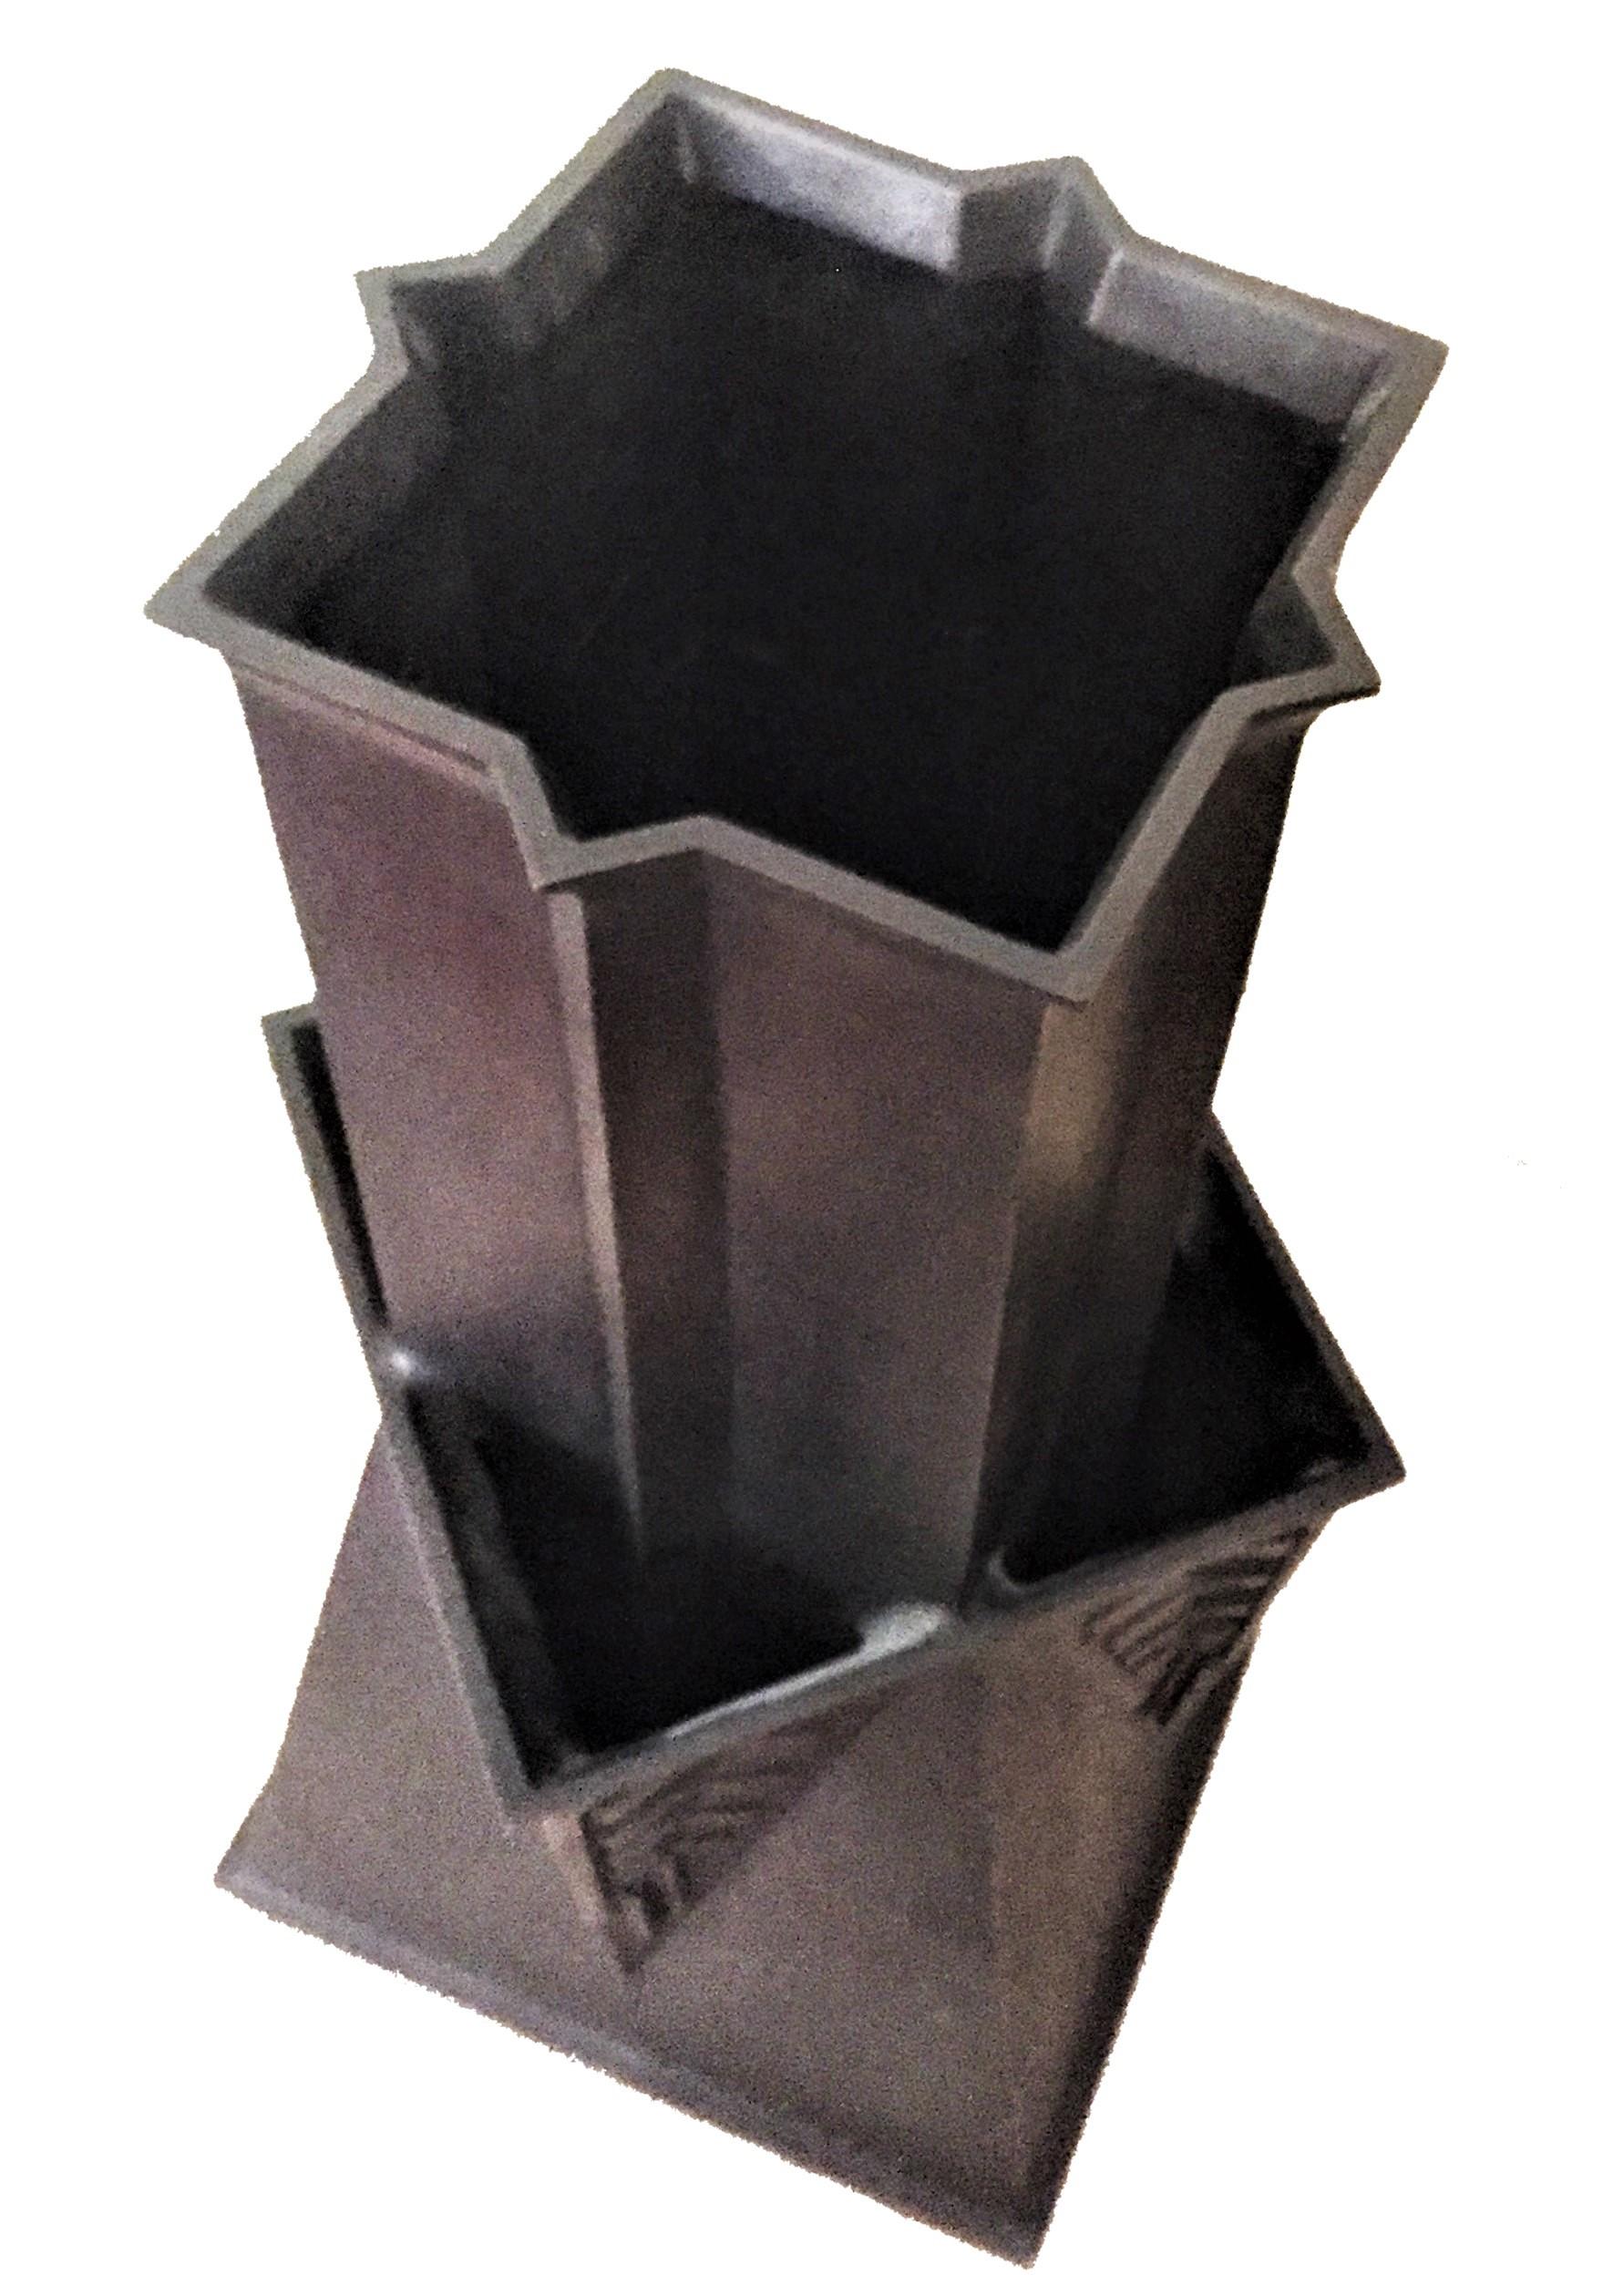 Frank Lloyd Wright Foundation Arts & Crafts patinated bronze pocket vase, limited edition of 29, 1992

An outstanding example of Arts & Crafts era design. A monumental vase with square columnar neck flanked. 

Limited Edition: only 29